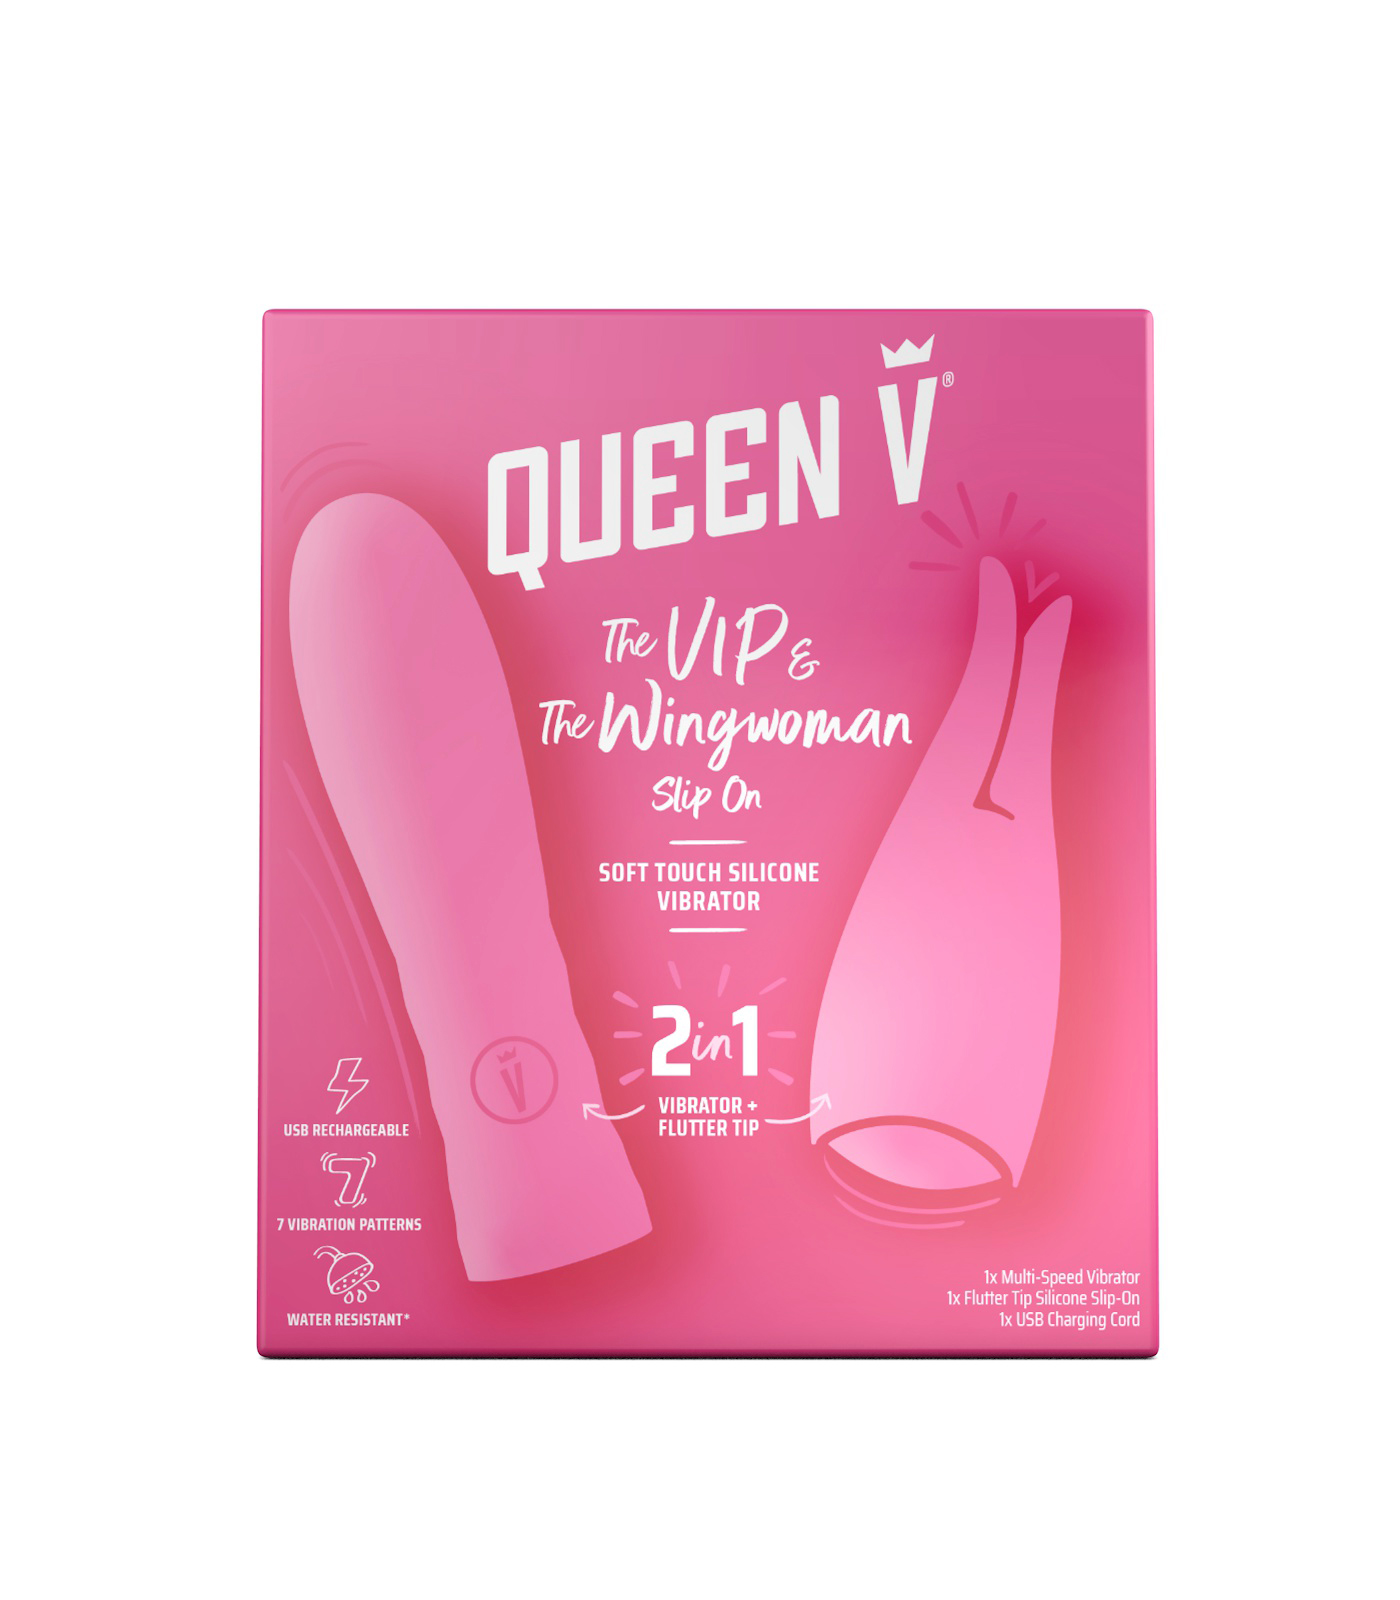 QUEEN V The VIP  The Wingwoman Slip On  Soft Touch Silicone Vibrator 2in1